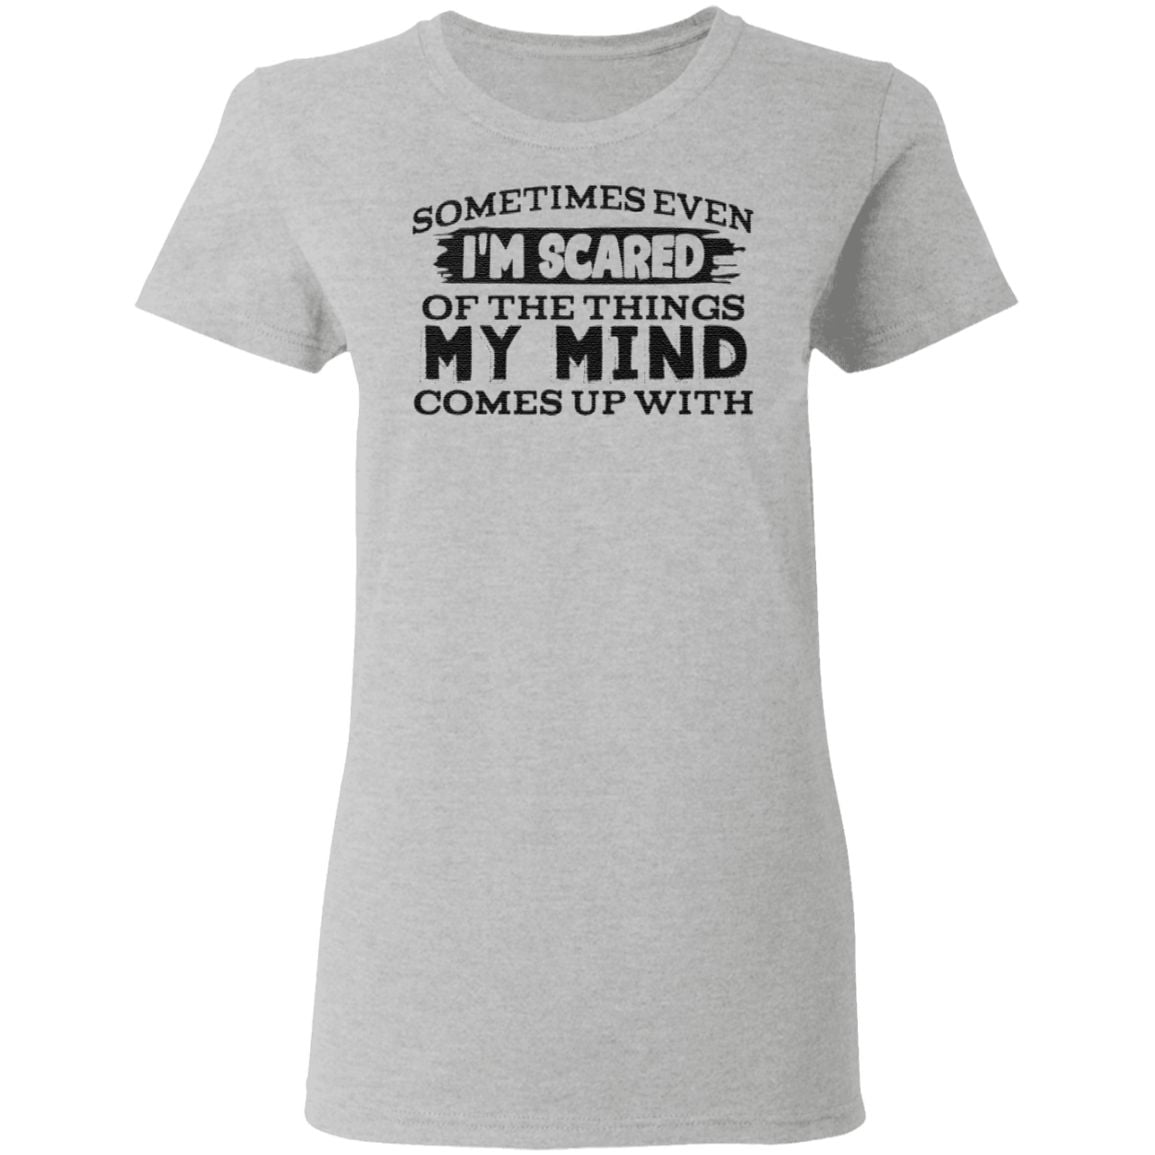 Sometimes even I’m scared of the things my mind comes up with t shirt